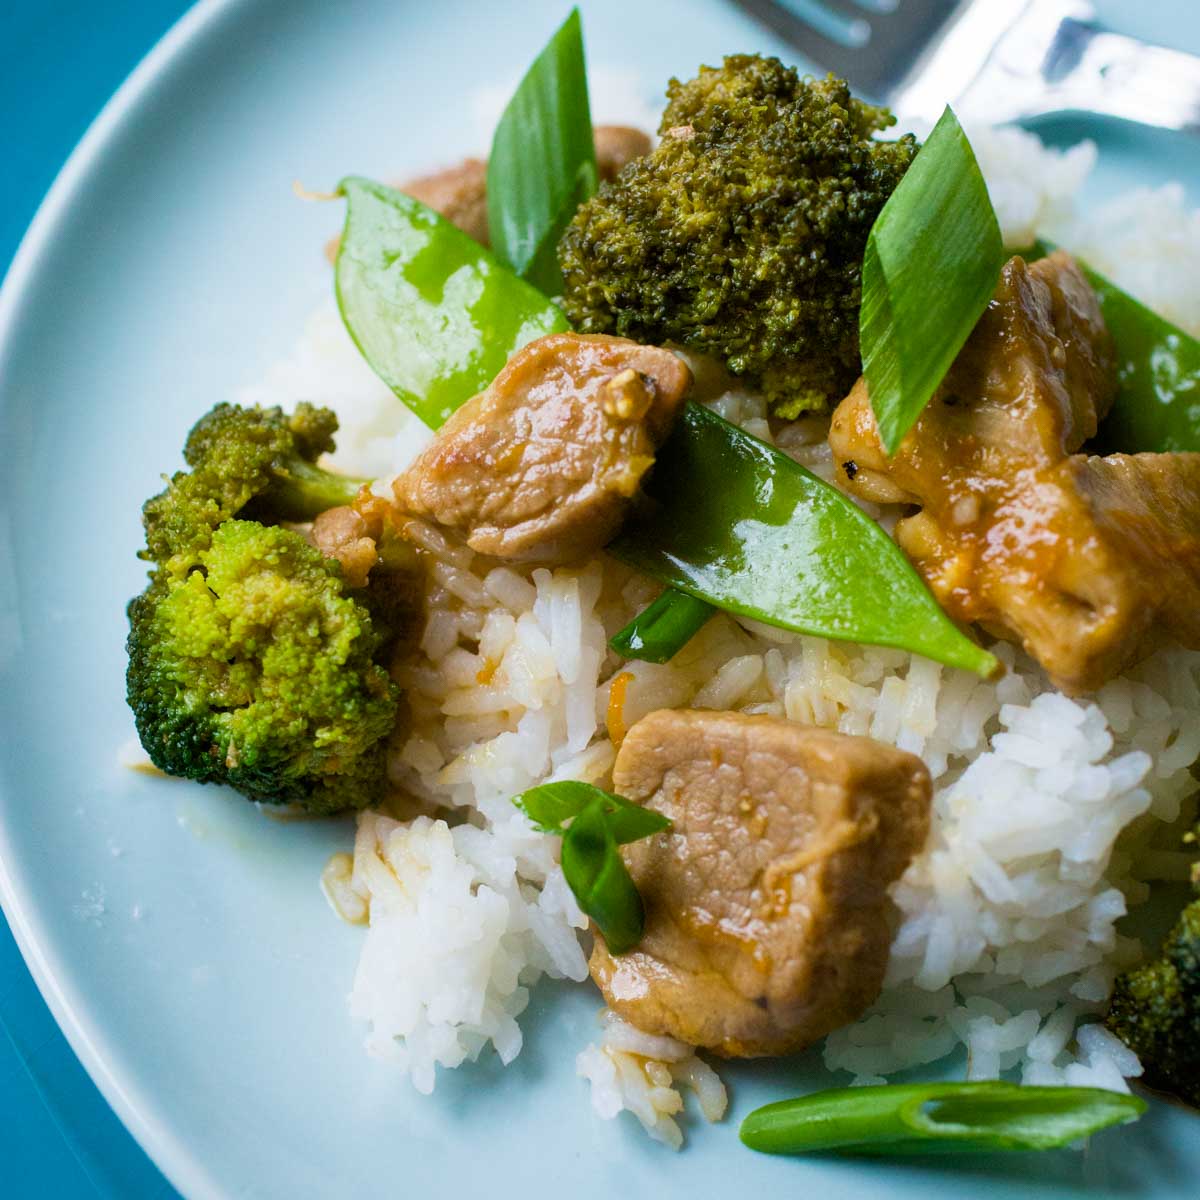 A blue plate has a bed of white rice and is topped with chunks of pork, broccoli spears, pea pods, and a sprinkle of green onions.